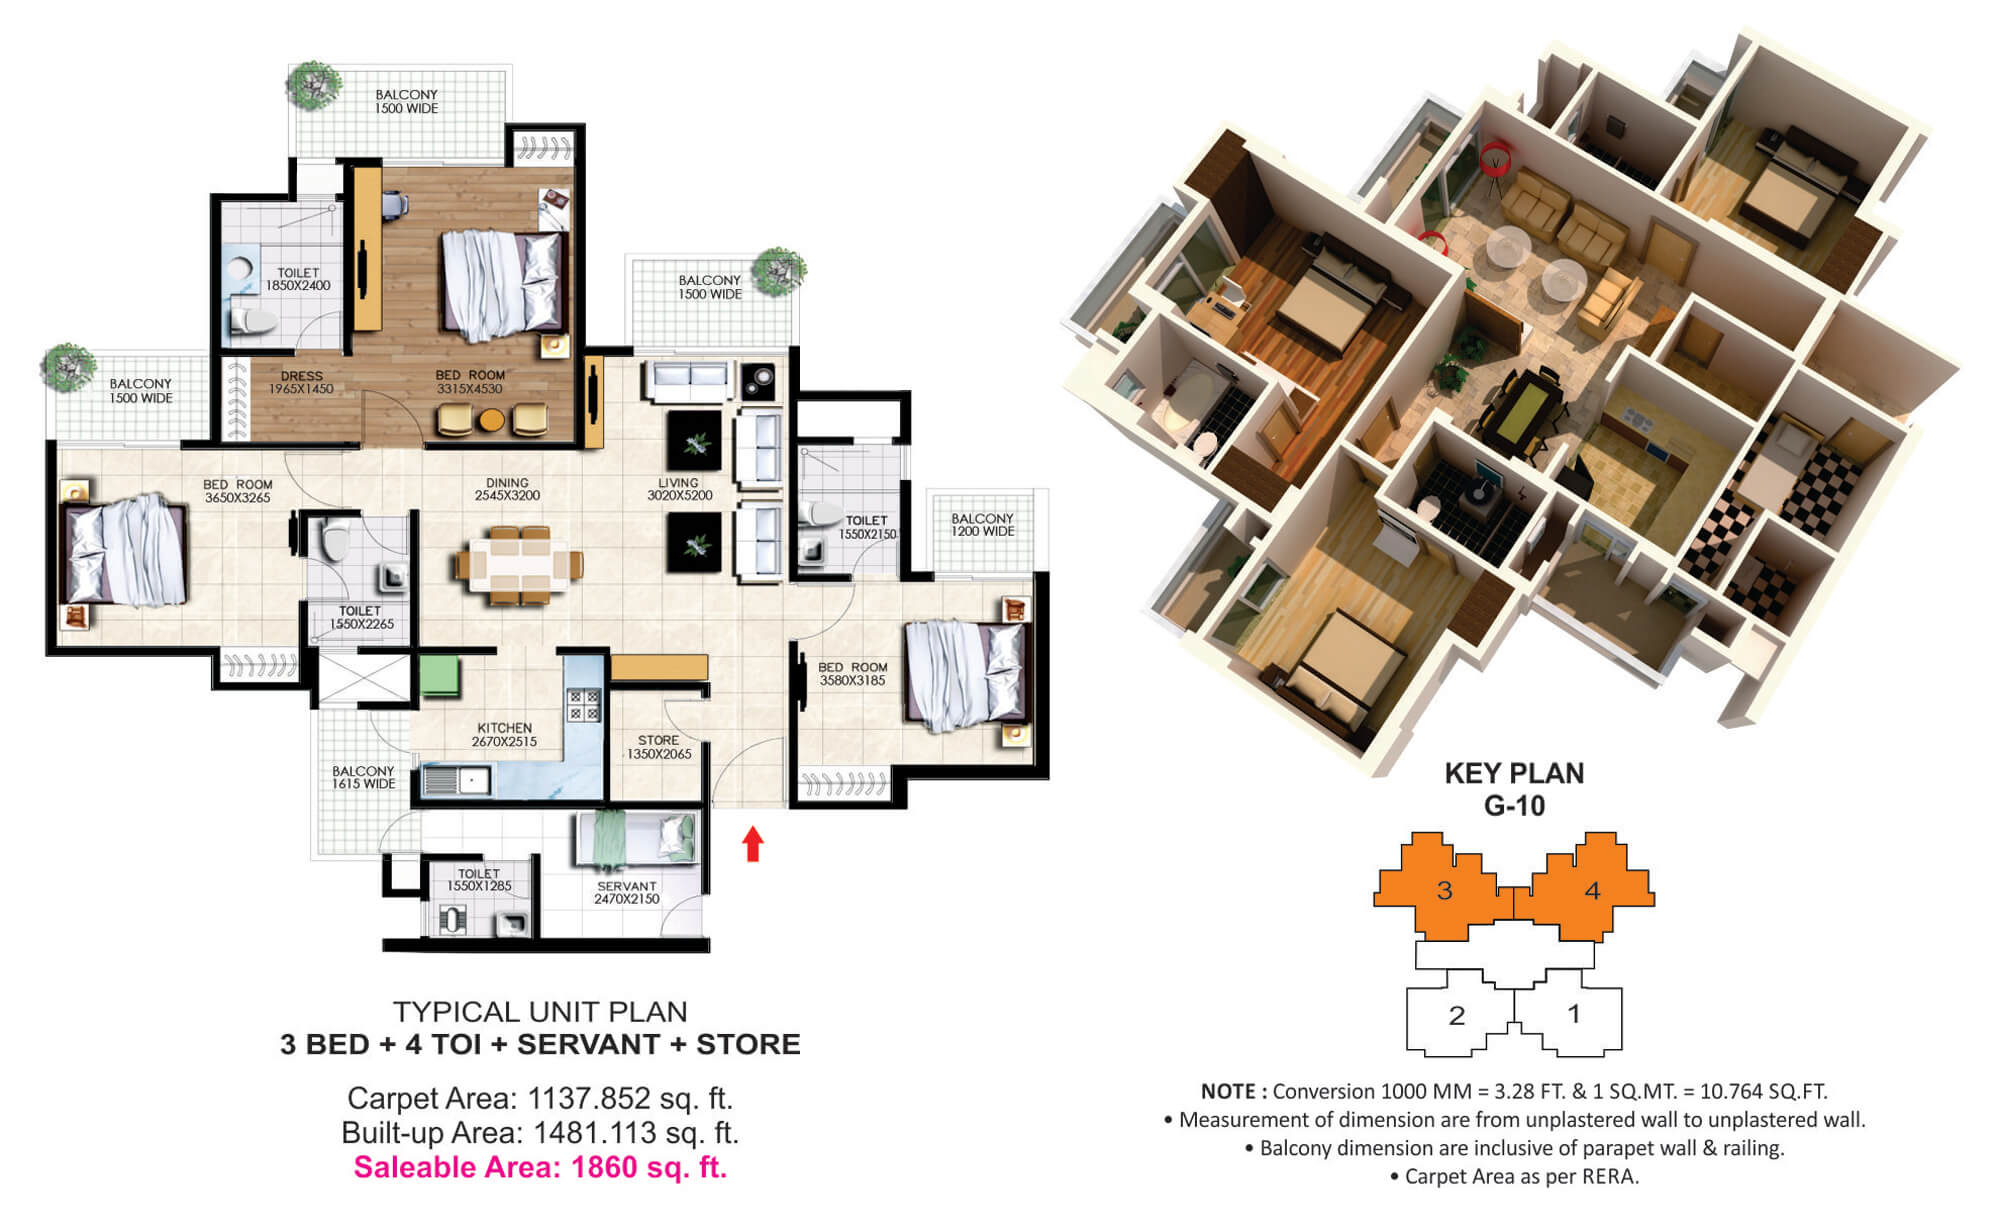 The floor plan size of 3 BHK + servant + store Flat is 1860 sq ft.